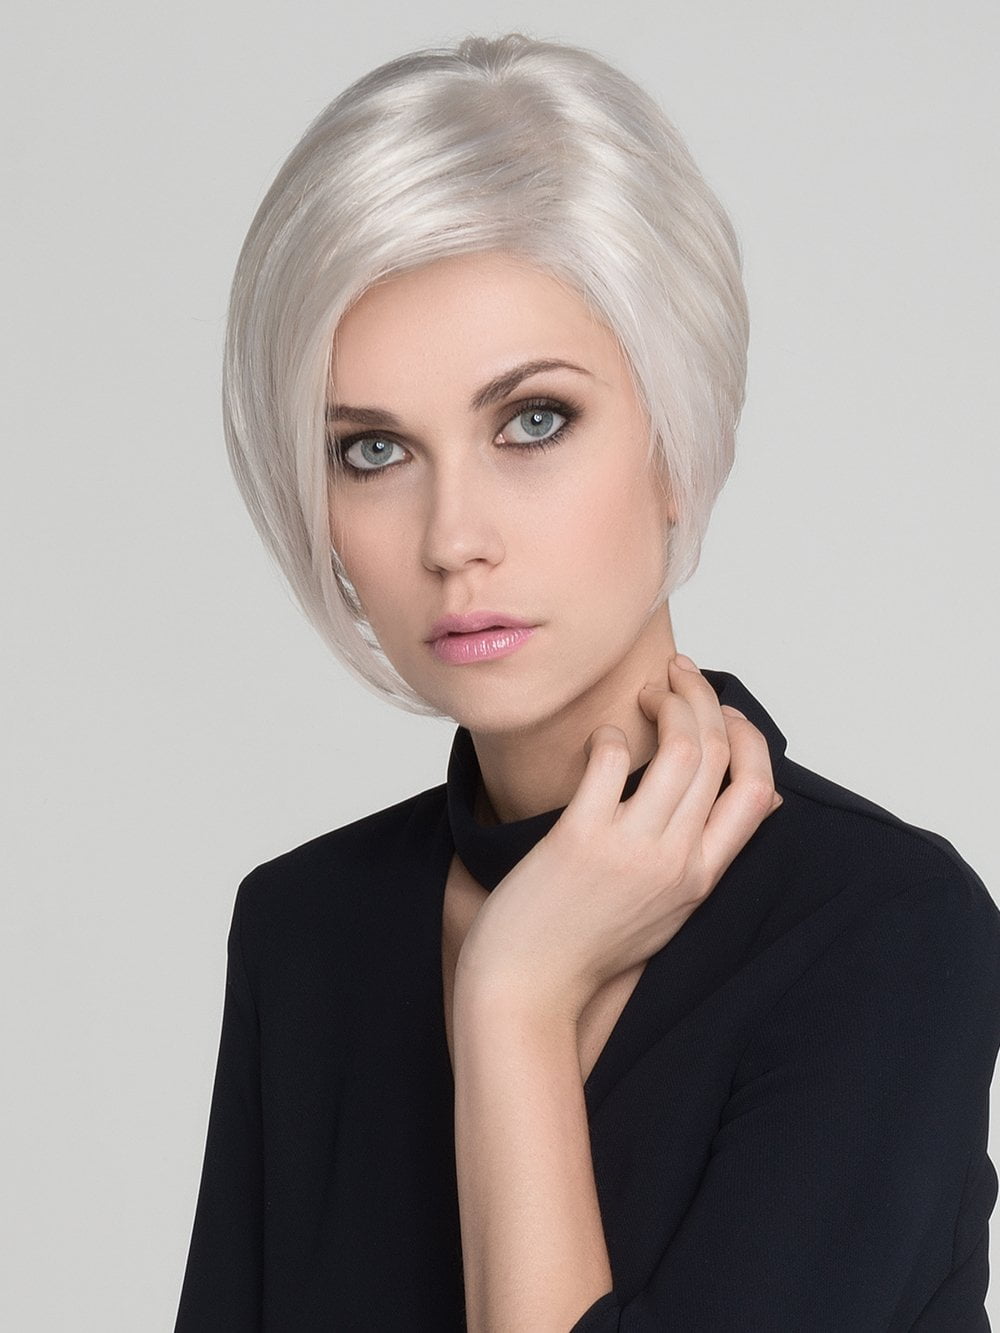 RICH MONO by ELLEN WILLE in PLATIN BLONDE MIX | Pearl Platinum, Light Golden Blonde, and Pure White Blend PPC MAIN IMAGE